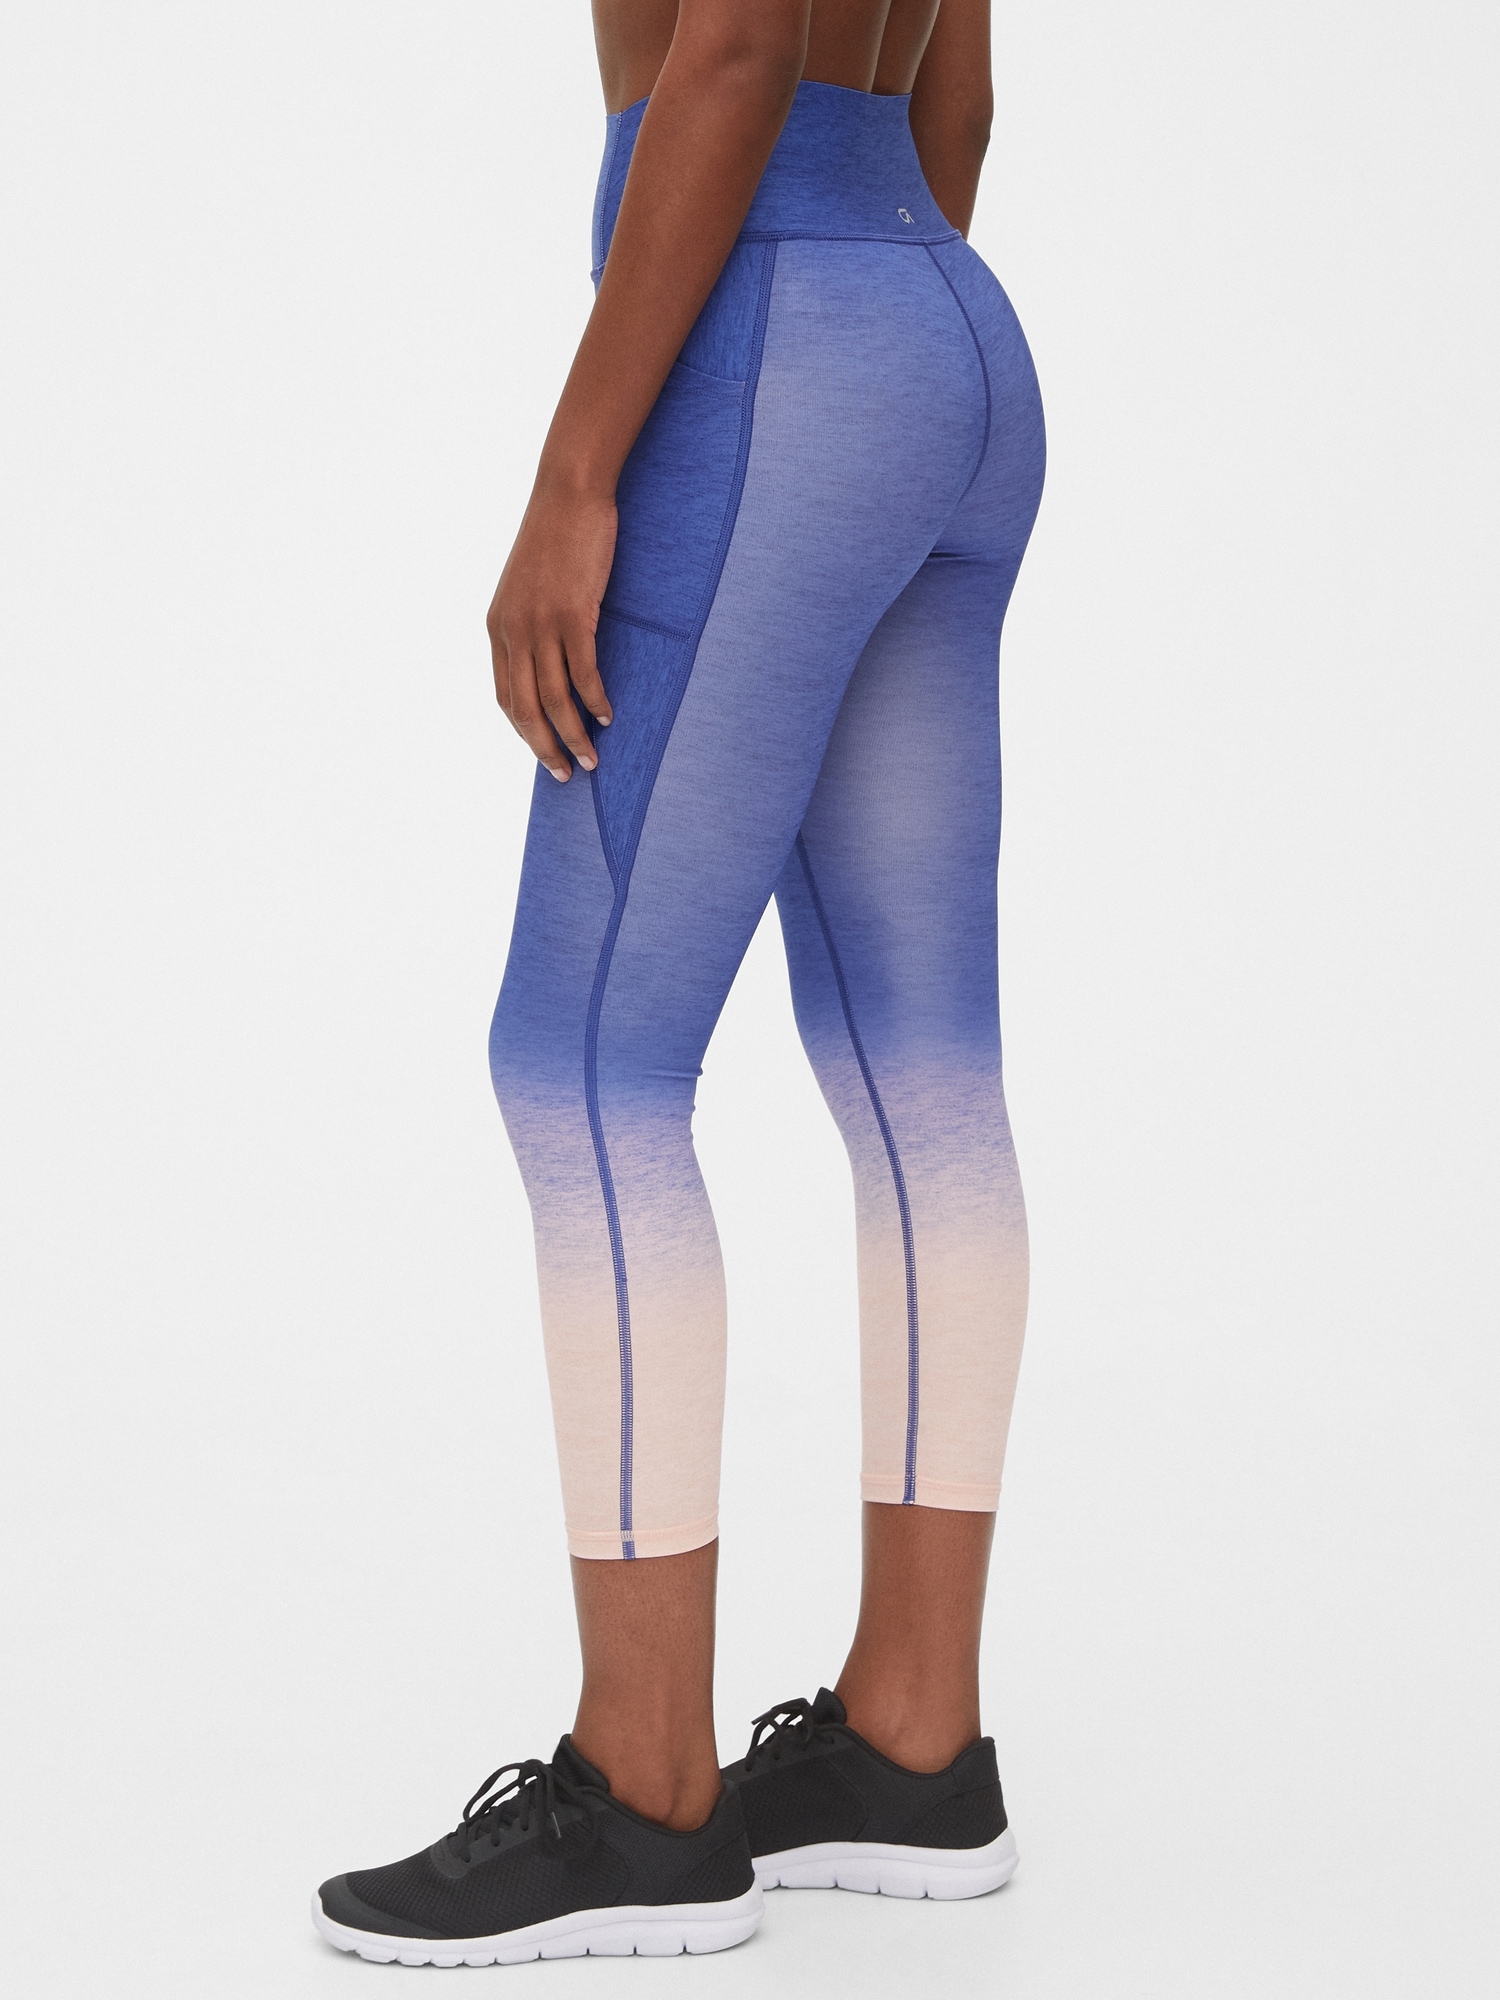  Love and Fit, Guardian Evolve Leggings, High Rise, Silicon  Grip, Waist Band, Moisture Wicking, Soft Compressive Fabric